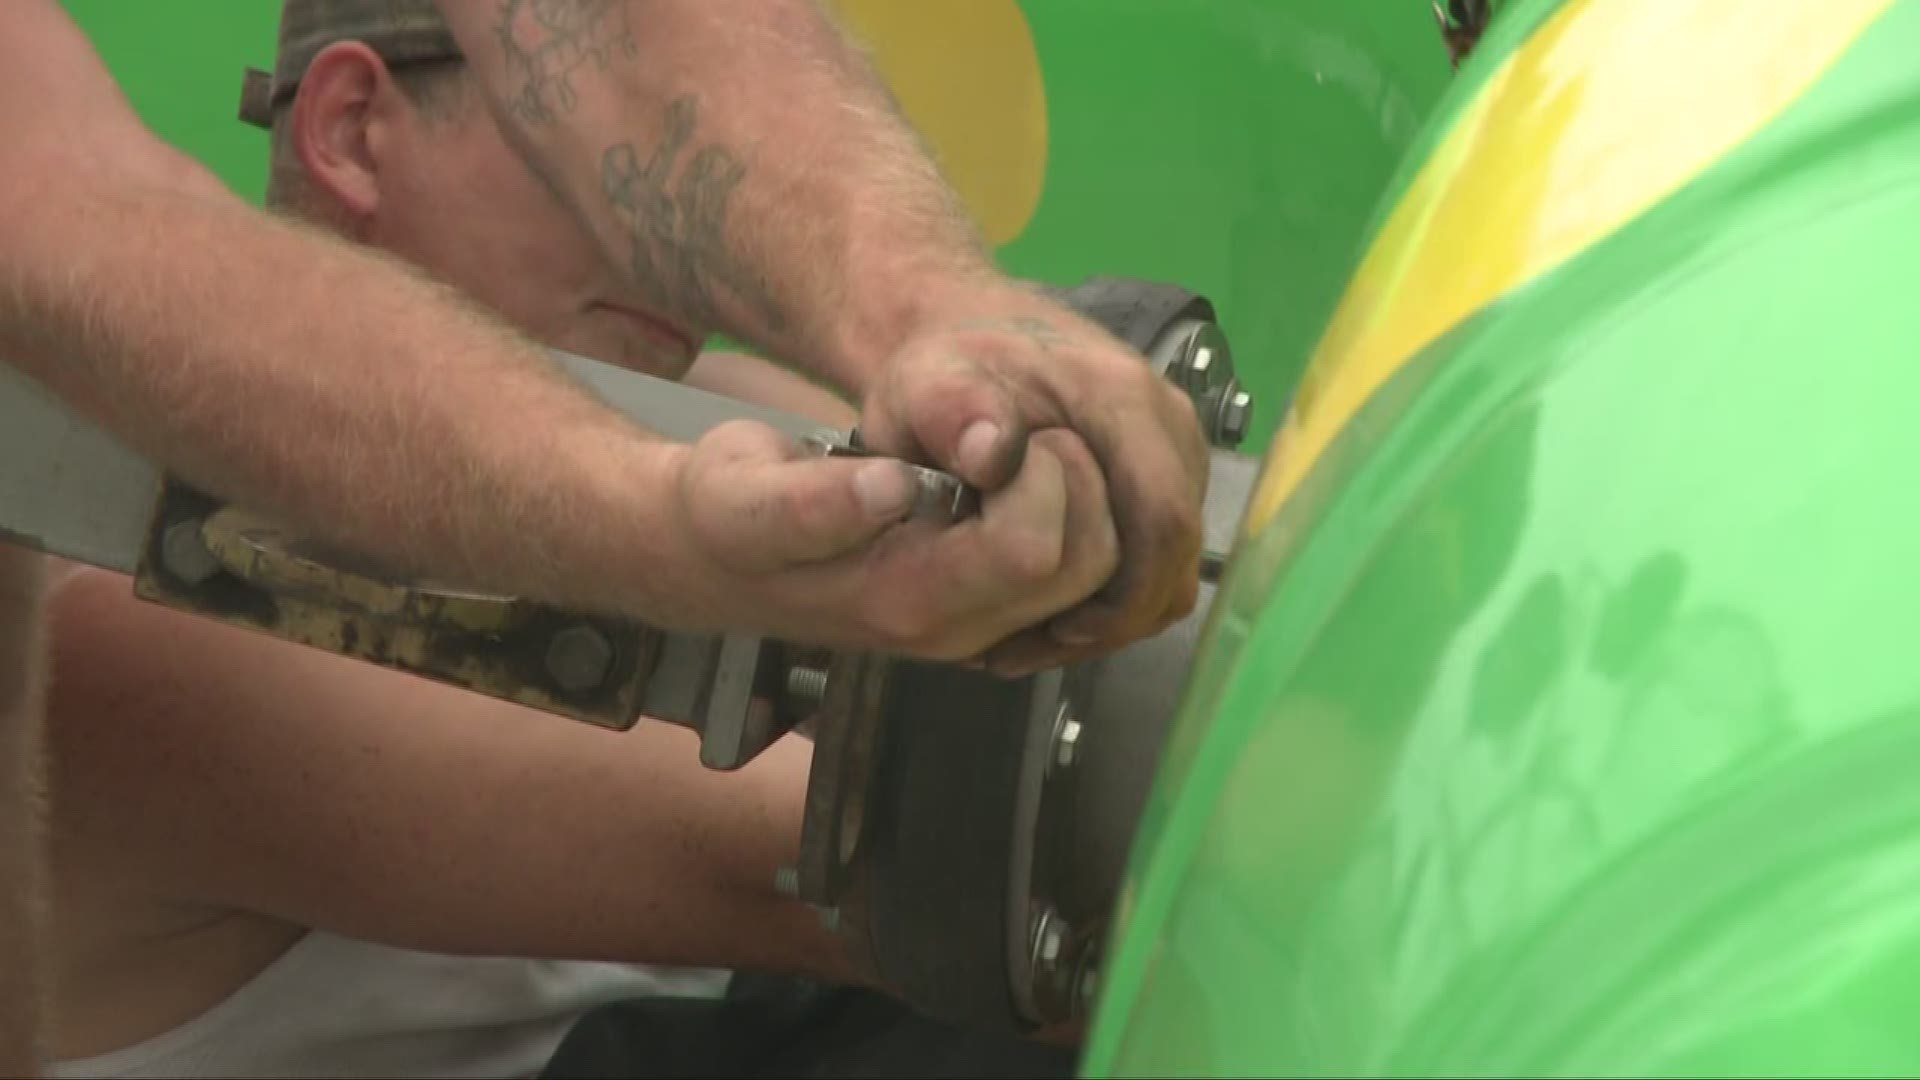 Cuyahoga County Fair organizers taking extra precautions for safety